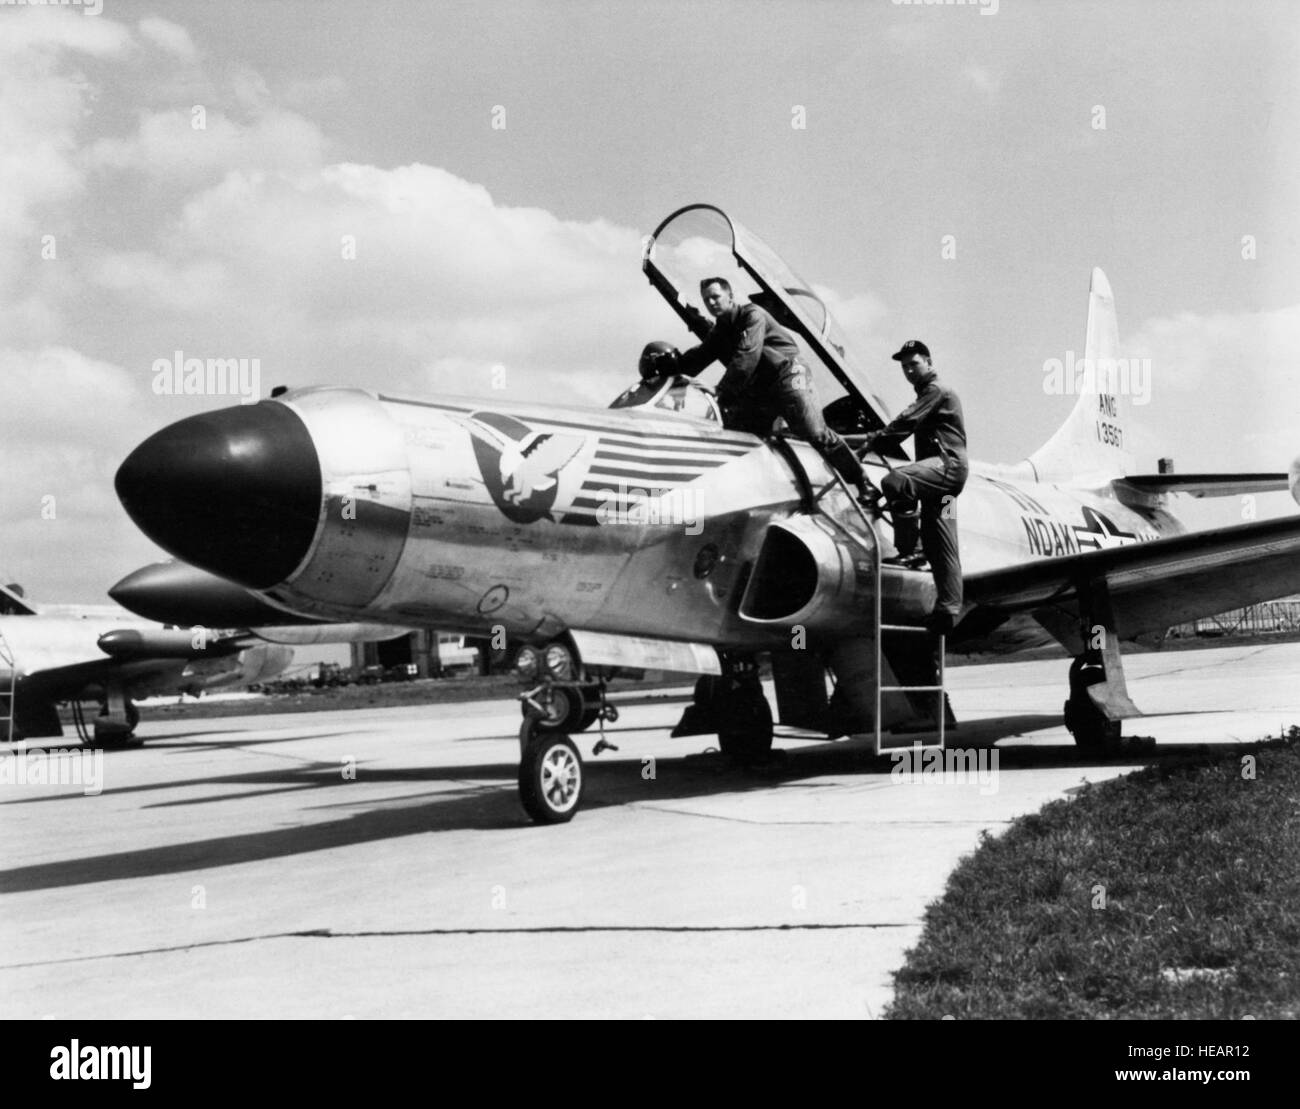 U.S. Air Force personnel assigned to the 119th Fighter Wing 'Happy Hooligans', North Dakota Air National Guard, Robert Groom and Neil Modin, photographed with their F-94 A/C Starfire aircraft at Hector Field, North Dakota. The 'Happy Hooligan' pilots flew the F-94 A/C Starfire aircraft from 1954-to-1960. (A3604) (U.S. Air Force Photo) (Released) Stock Photo